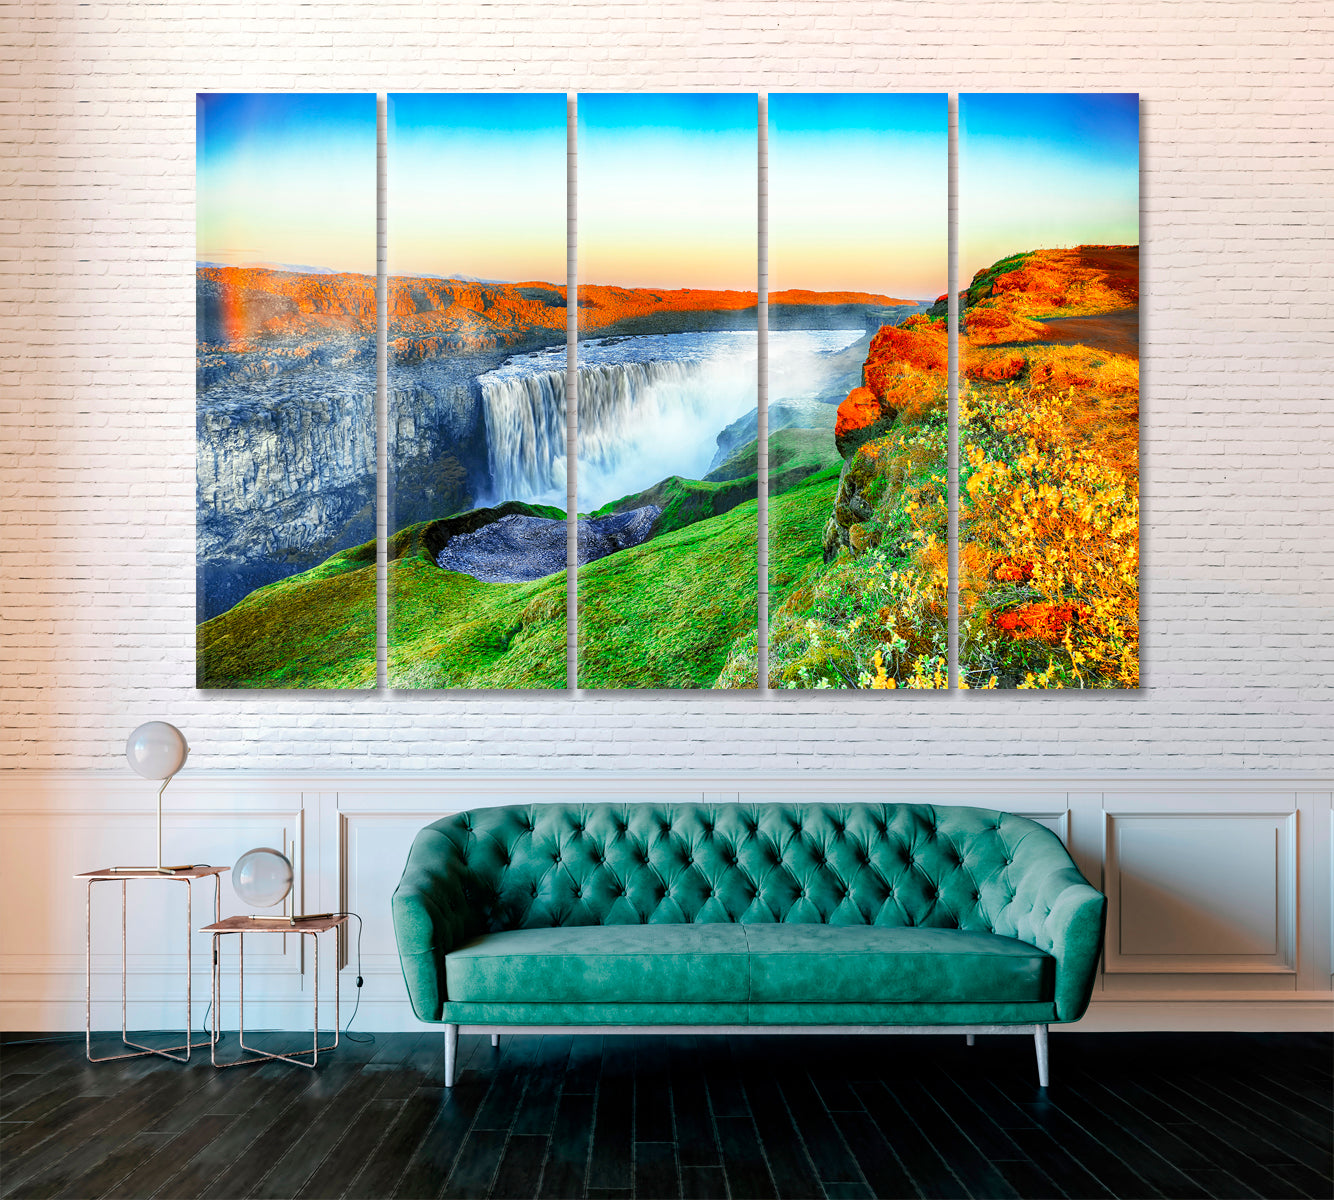 Dettifoss Waterfall Northeastern Iceland Canvas Print ArtLexy 5 Panels 36"x24" inches 